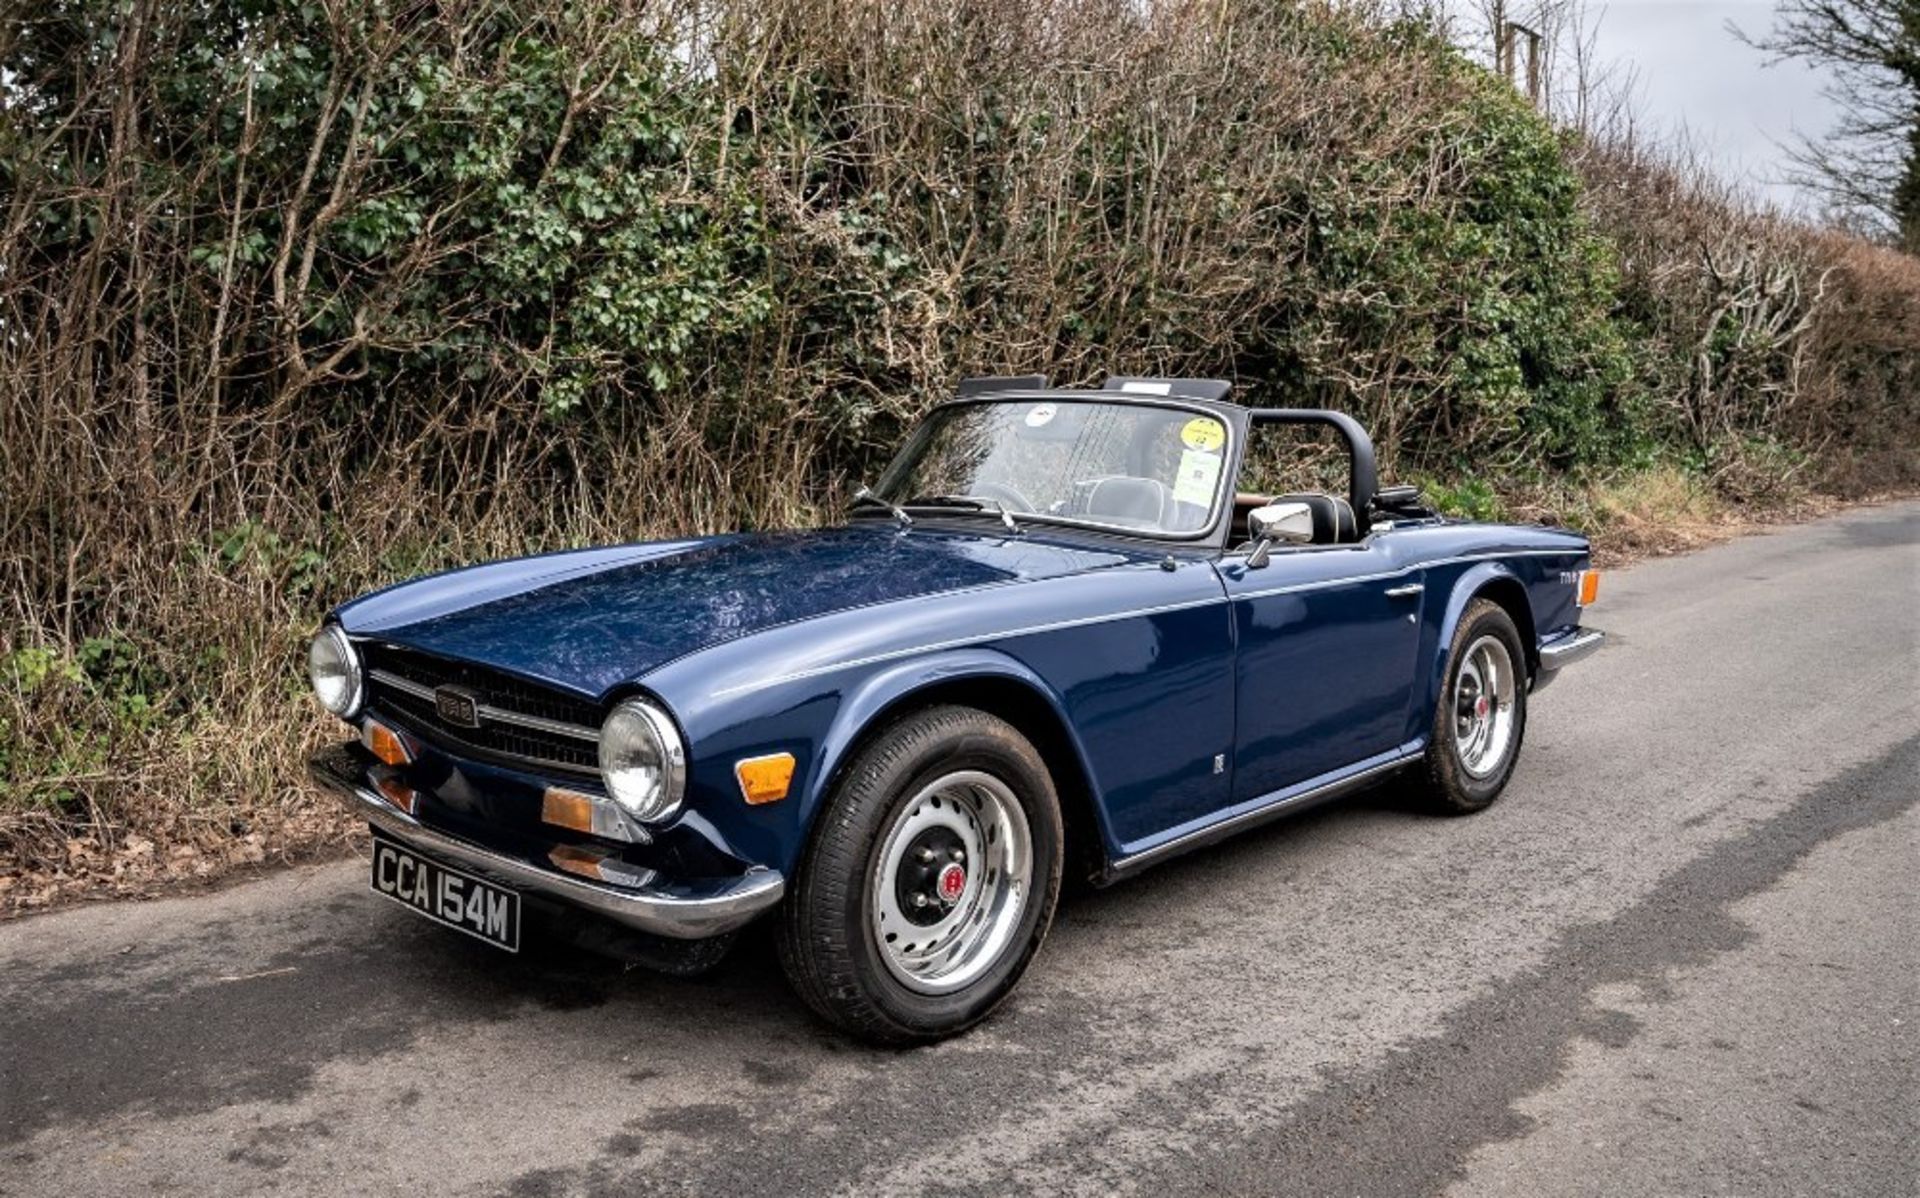 1974 TRIUMPH TR6 Registration Number: CCA 154M Chassis Number: CF21486U Recorded Mileage: c.15,000